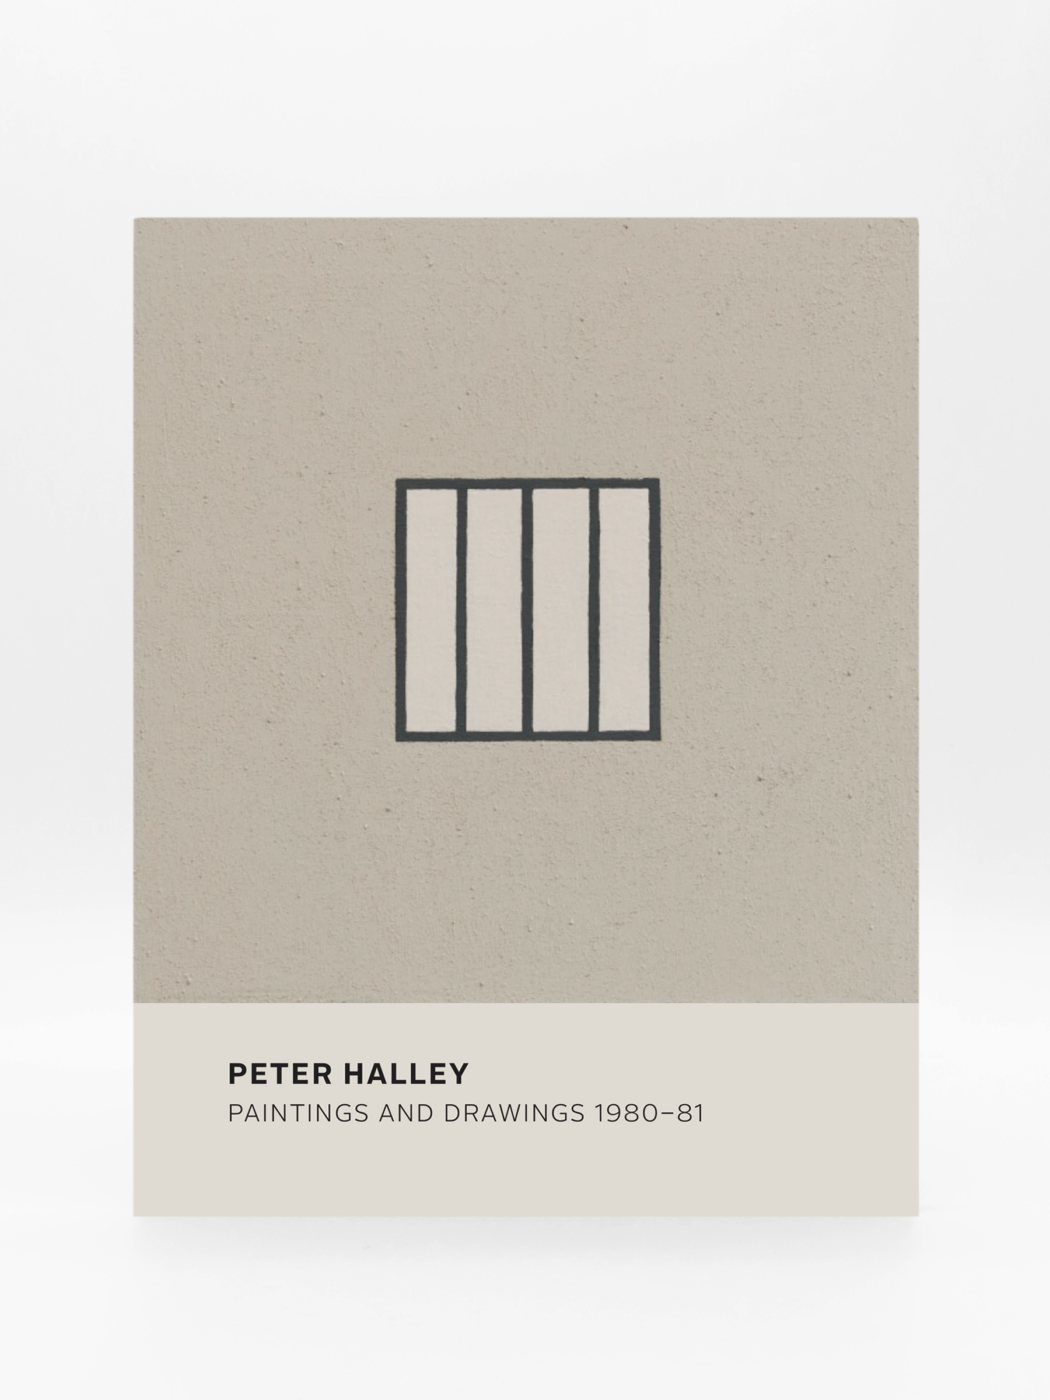 Peter Halley, Paintings and Drawings 1980-81